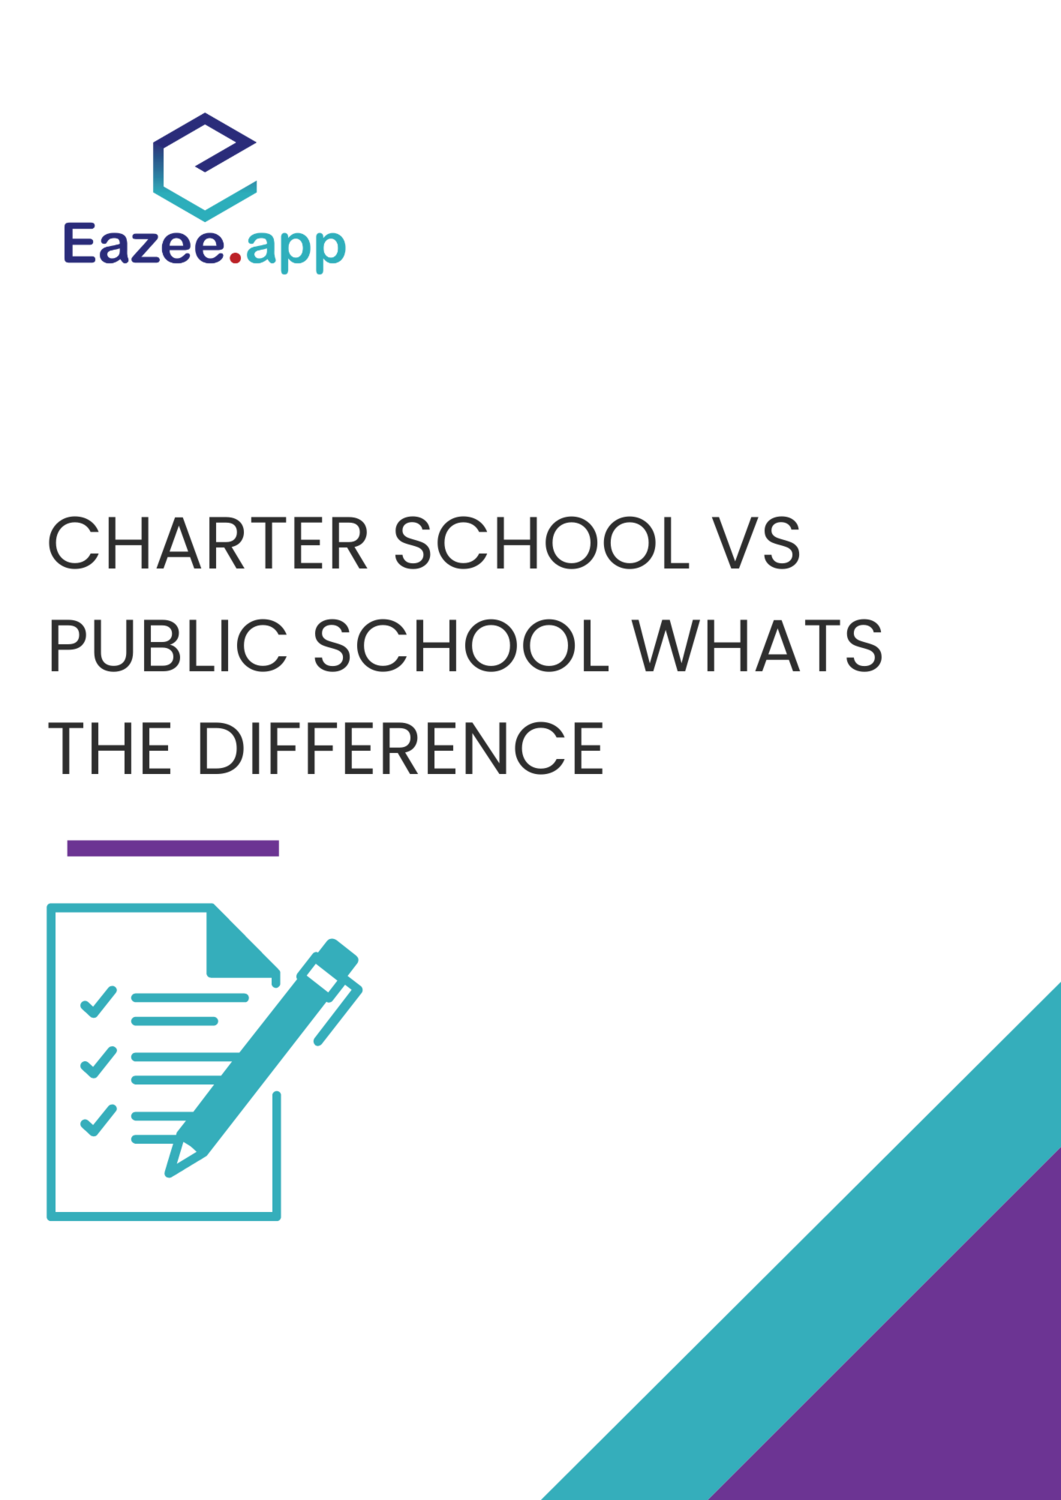 Charter school vs public school what's the difference